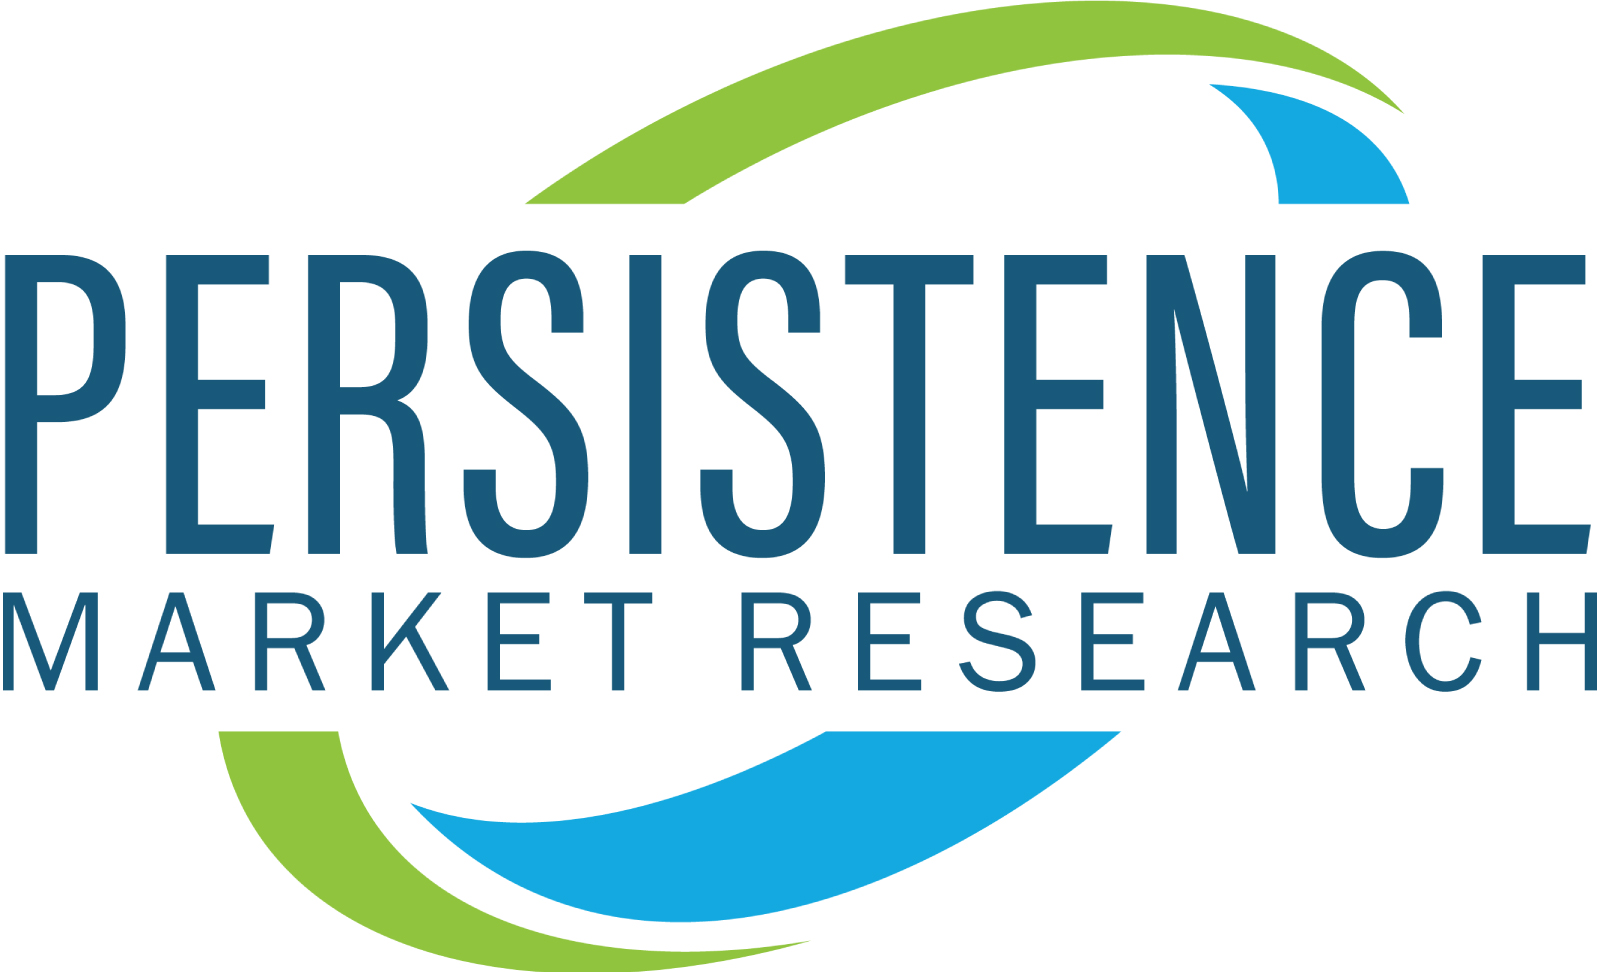 Family/Indoor Entertainment Centers Market Growing at CAGR of 12.2% and value US $41 Bn in 2022 – Persistence Market Research